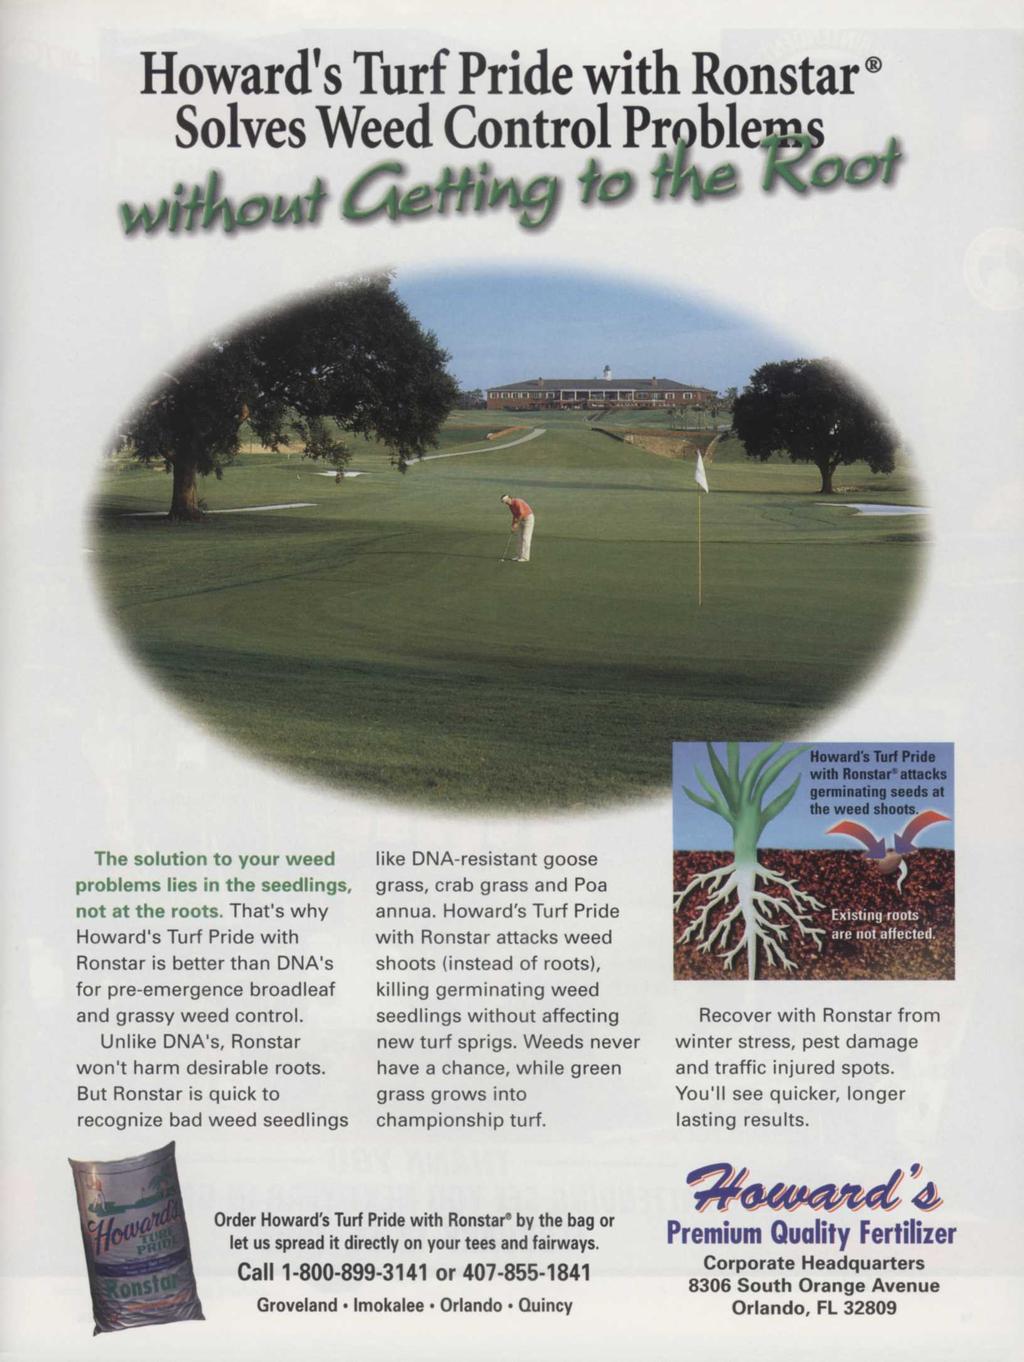 Howard's Turf Pride with Ronstar Solves Weed Control Problems. O e ^ m Q to the < o o t w Howard's Turf Pride with Ronstar" attacks germinating seeds at k ^f k the weed shoots.